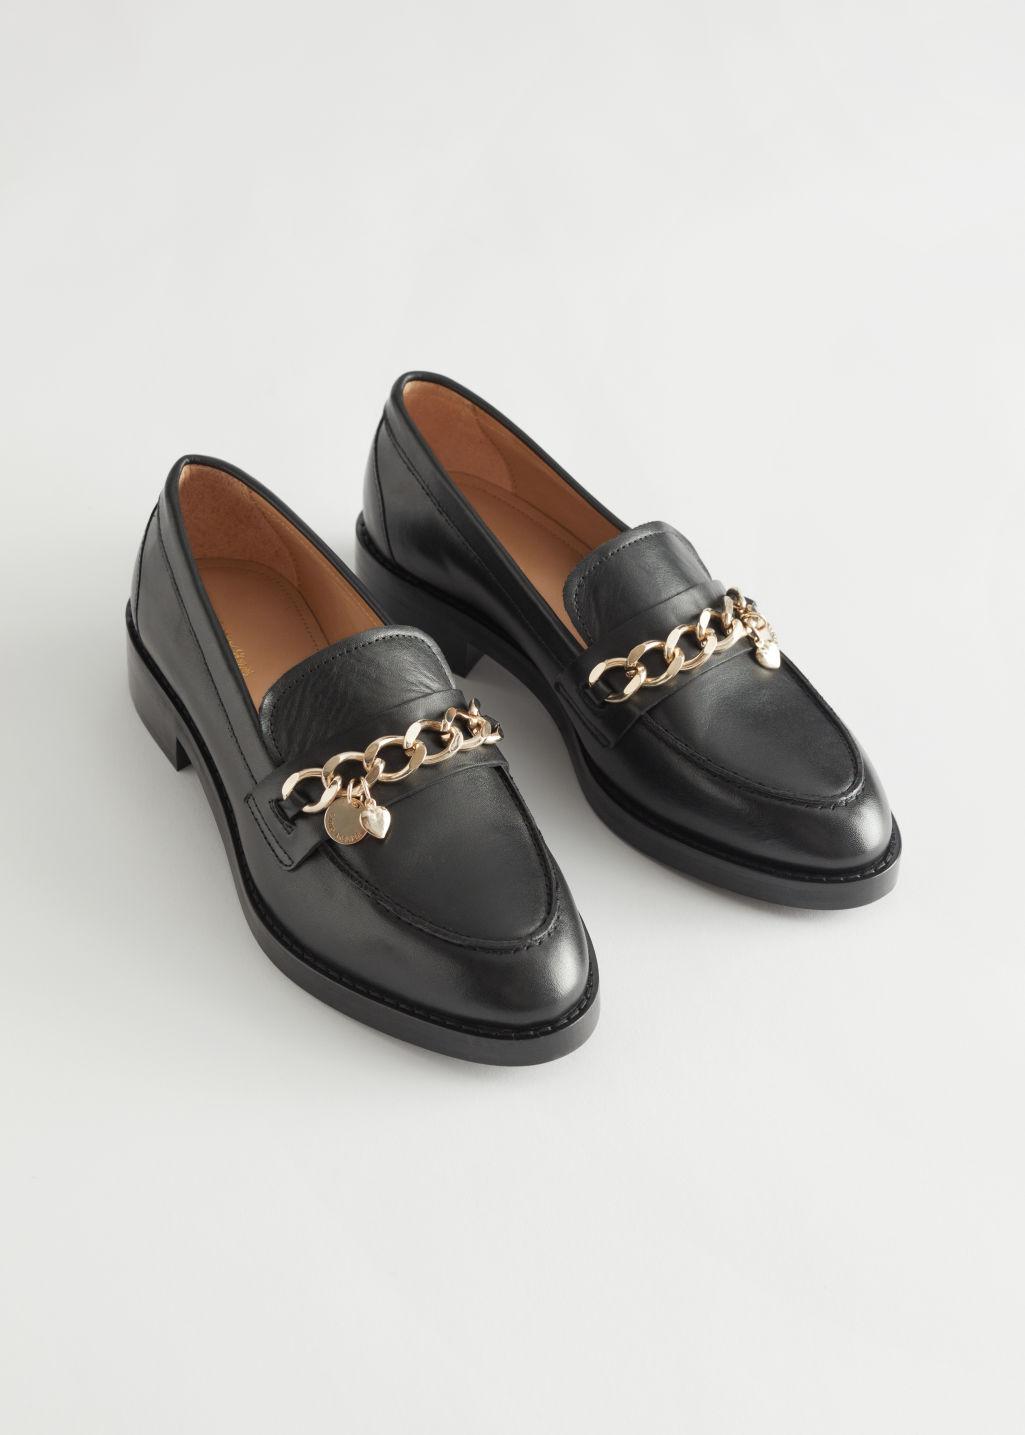 & Other Stories Chain Embellished Leather Loafers in Black | Lyst